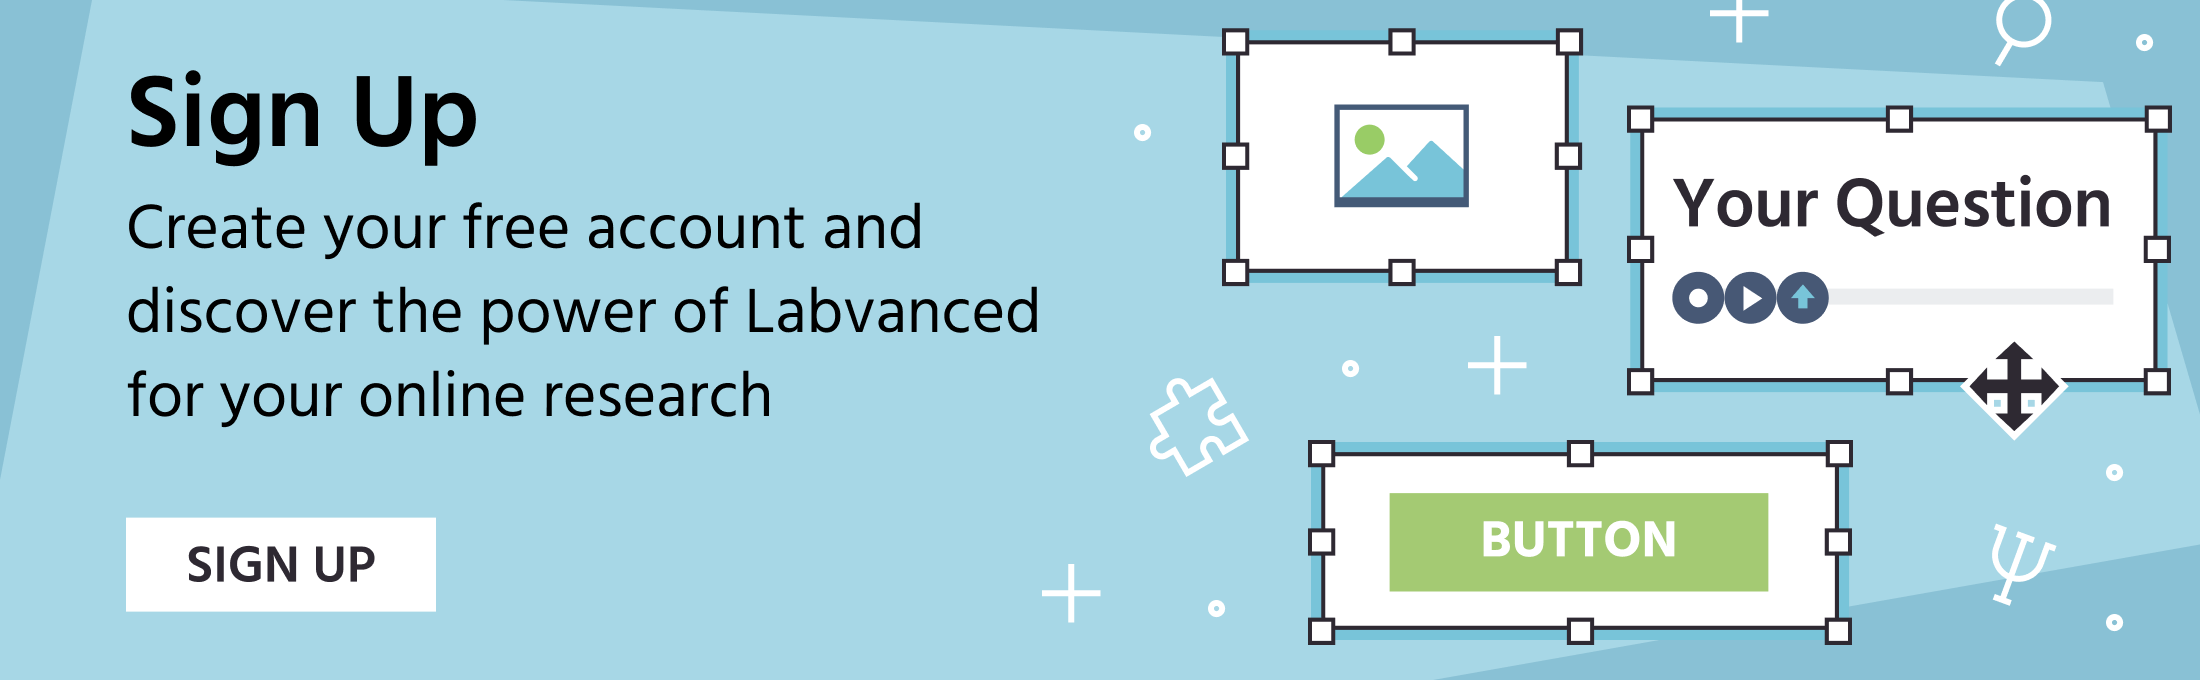 Sign up for Labvanced to create your psychology experiment assessing migraine and headache patients online.